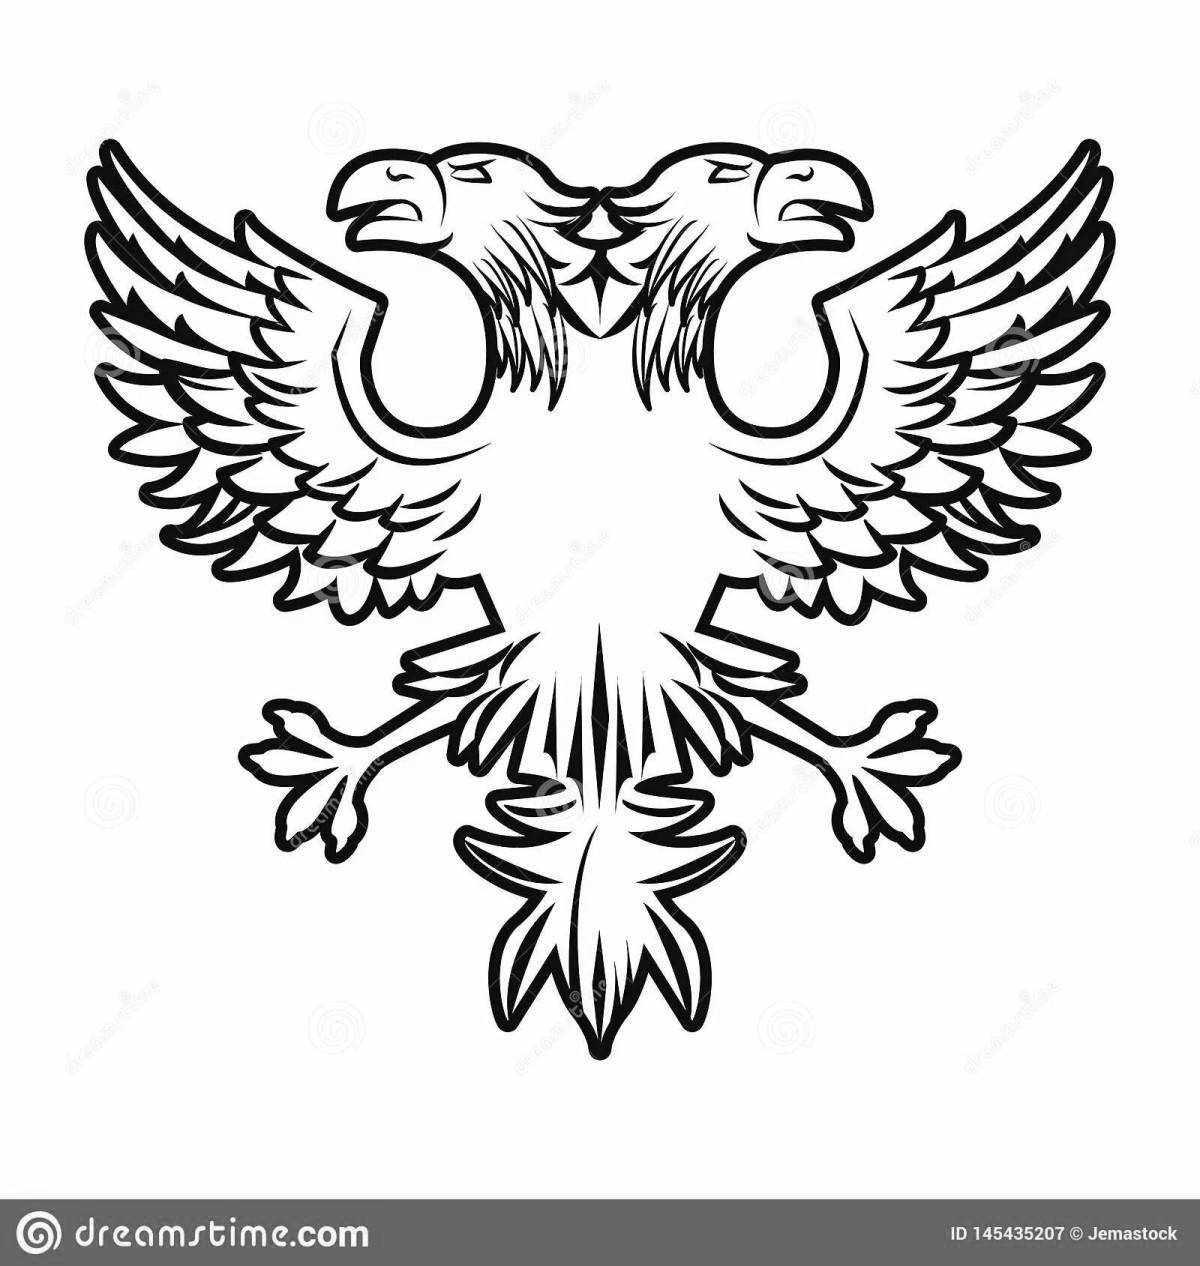 Dazzling coloring double-headed eagle